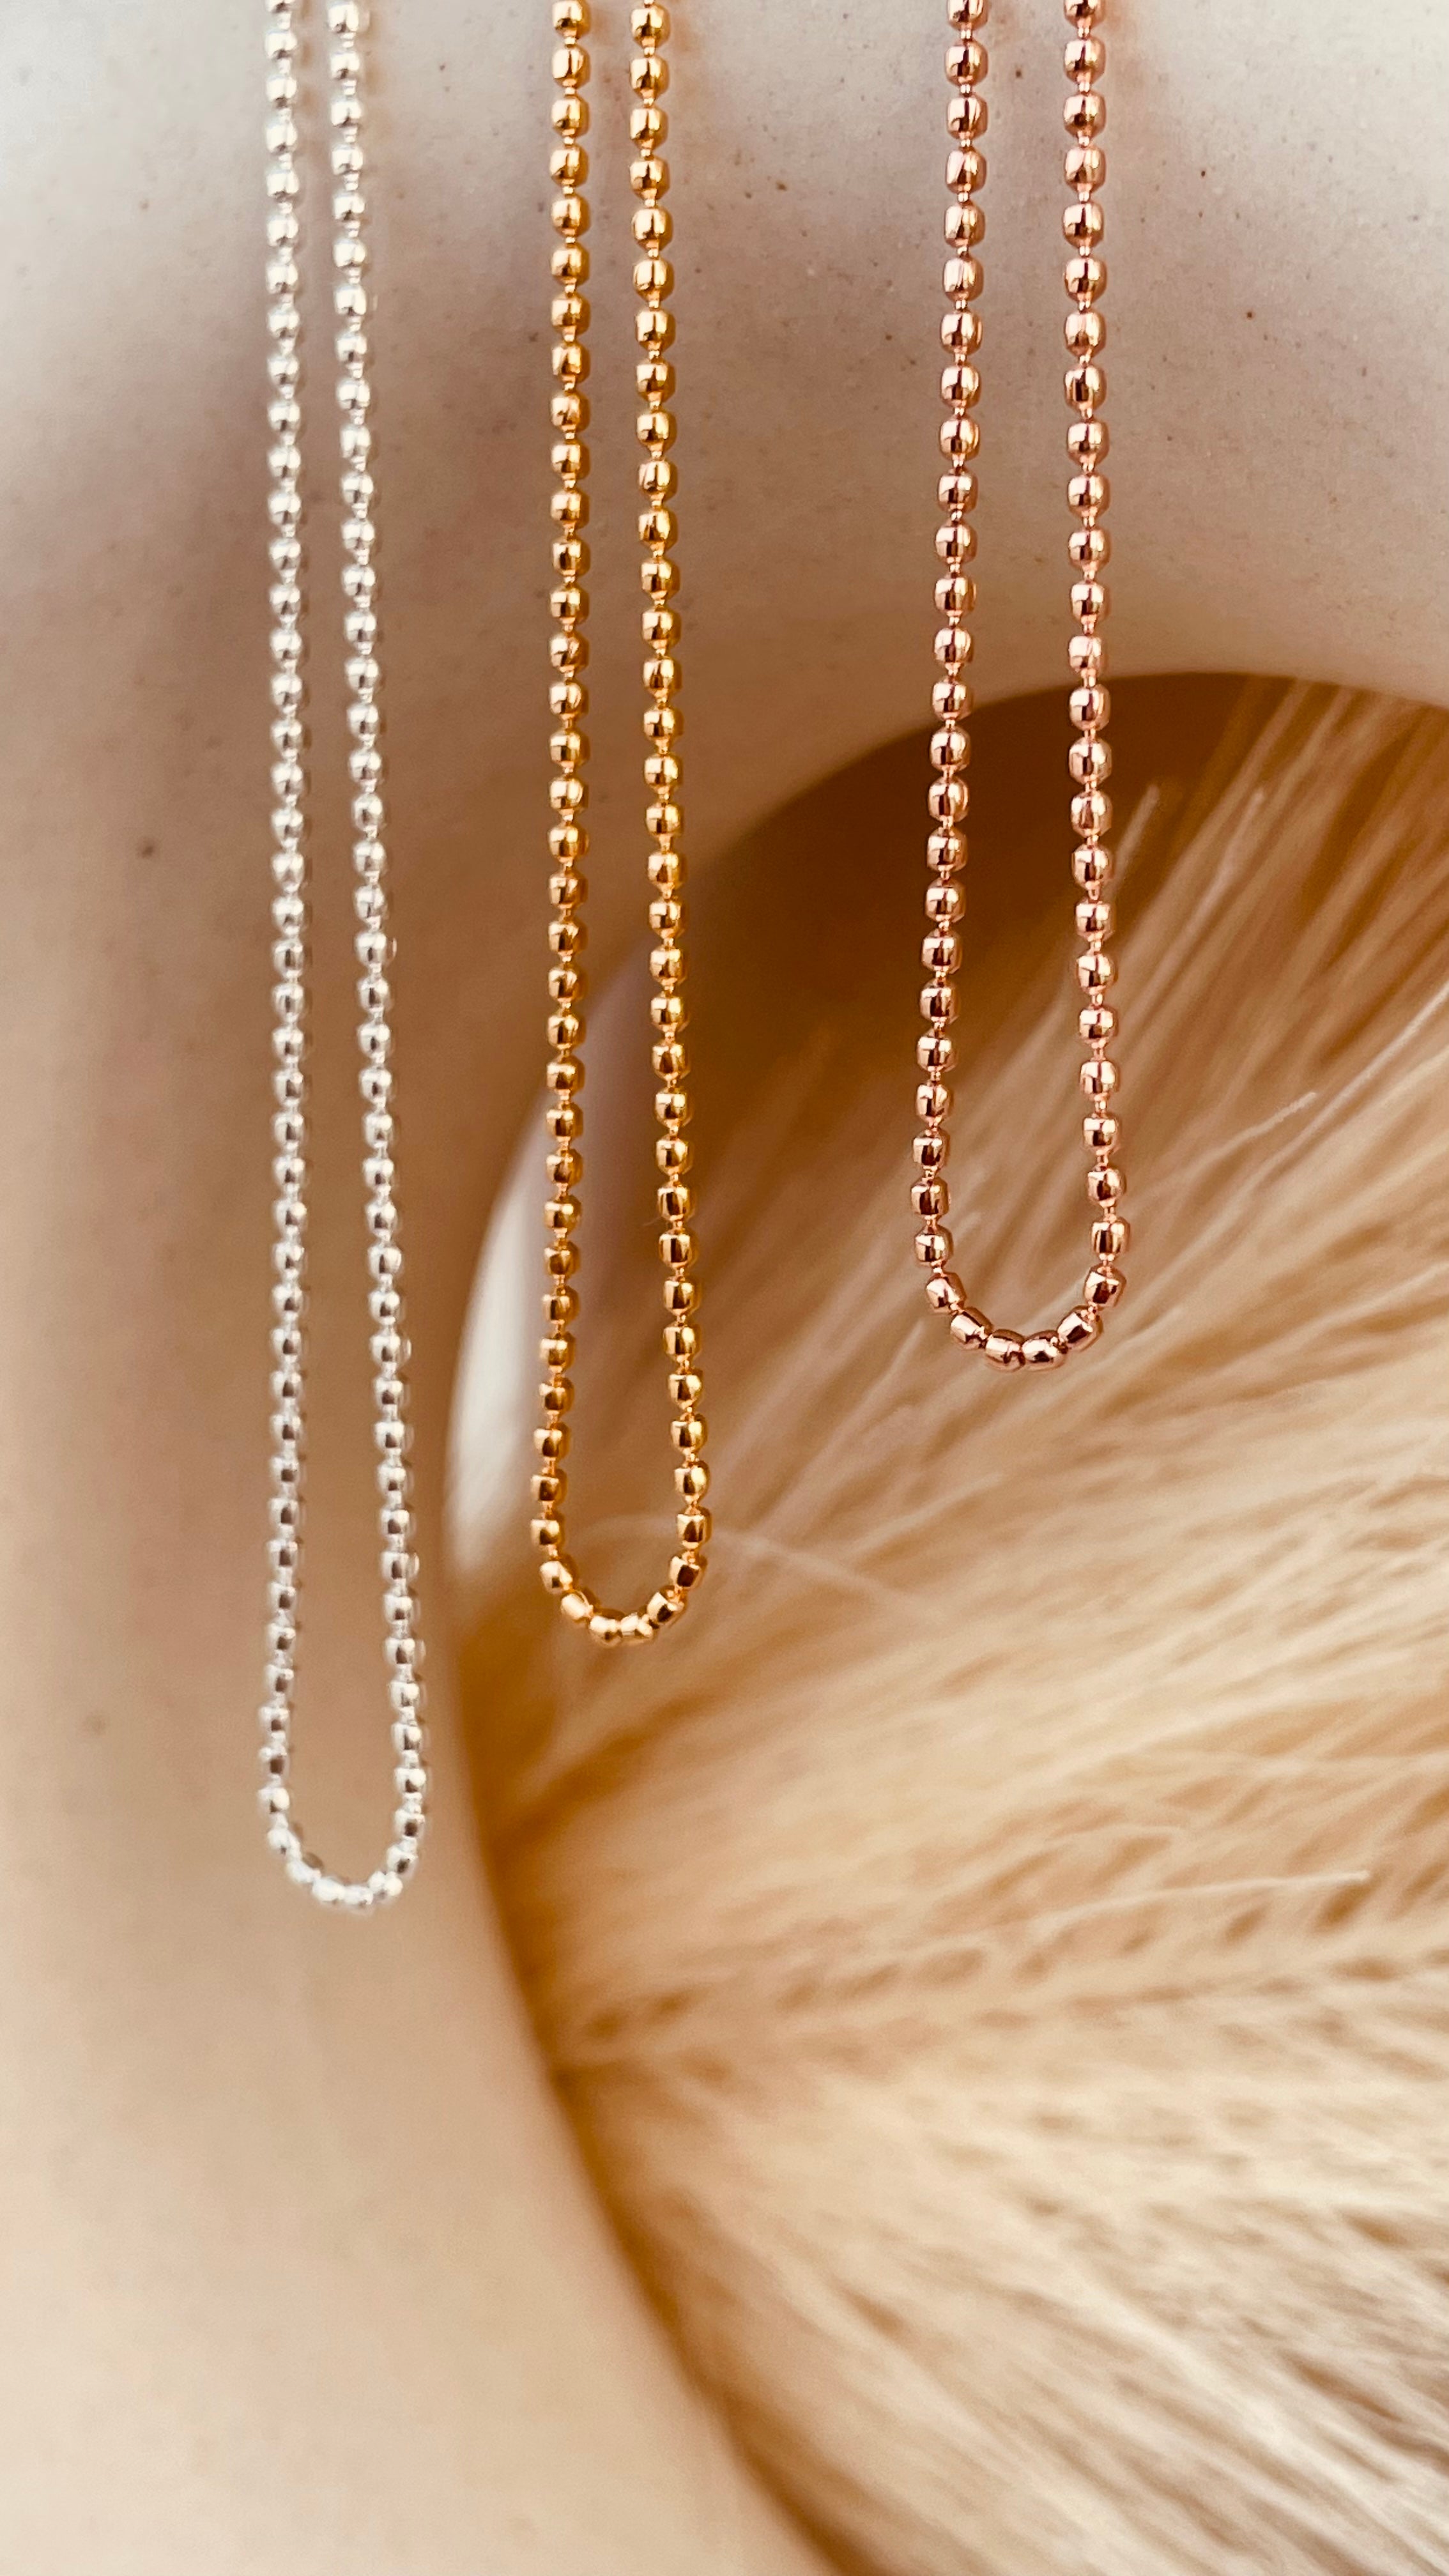 Rose Gold Faceted Beaded Chain Necklace - Octonov 